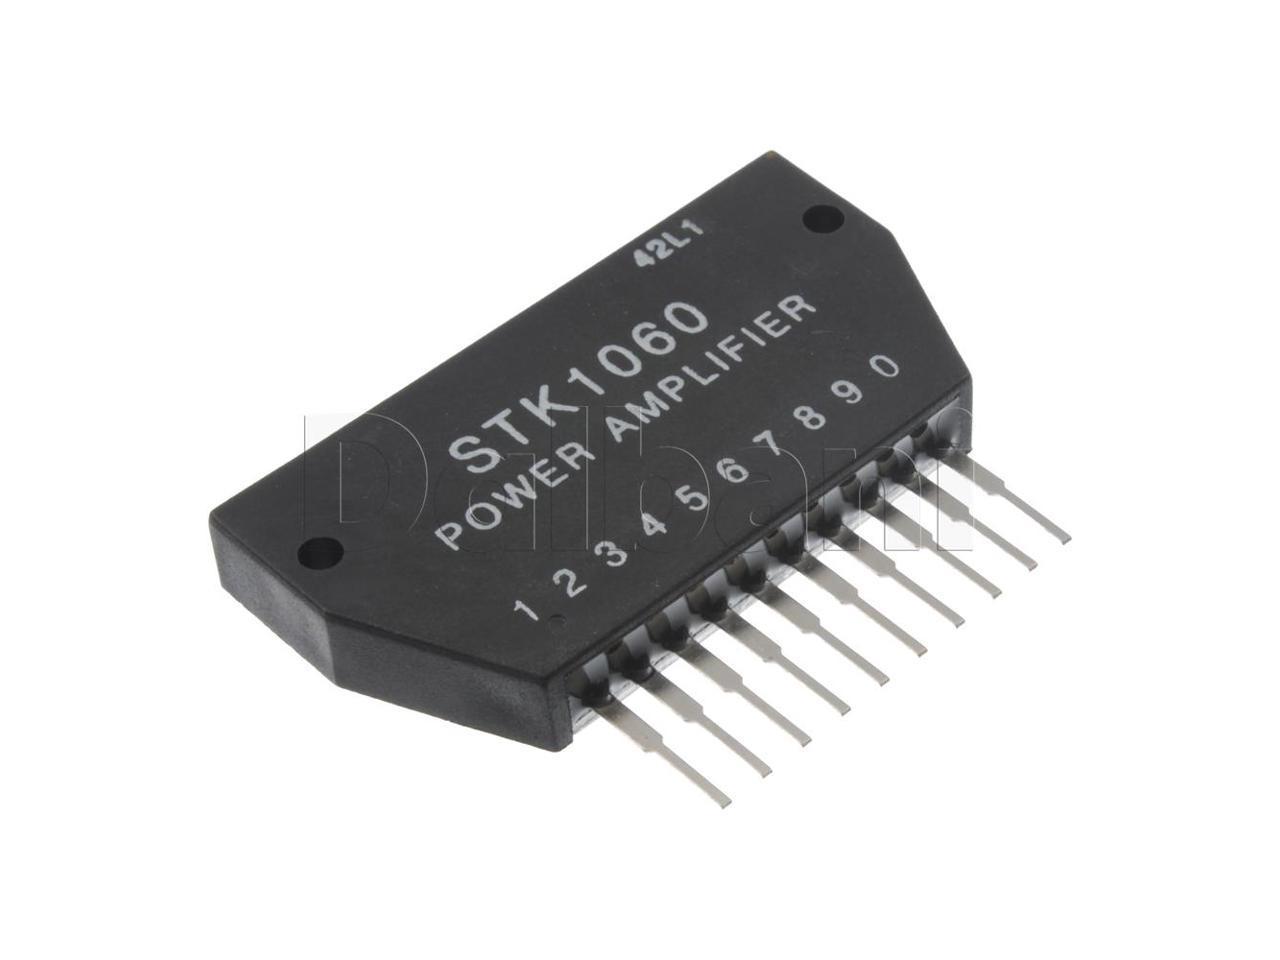 STK1060 Free Shipping US SELLER Integrated Circuit IC Power Stereo Amplifier